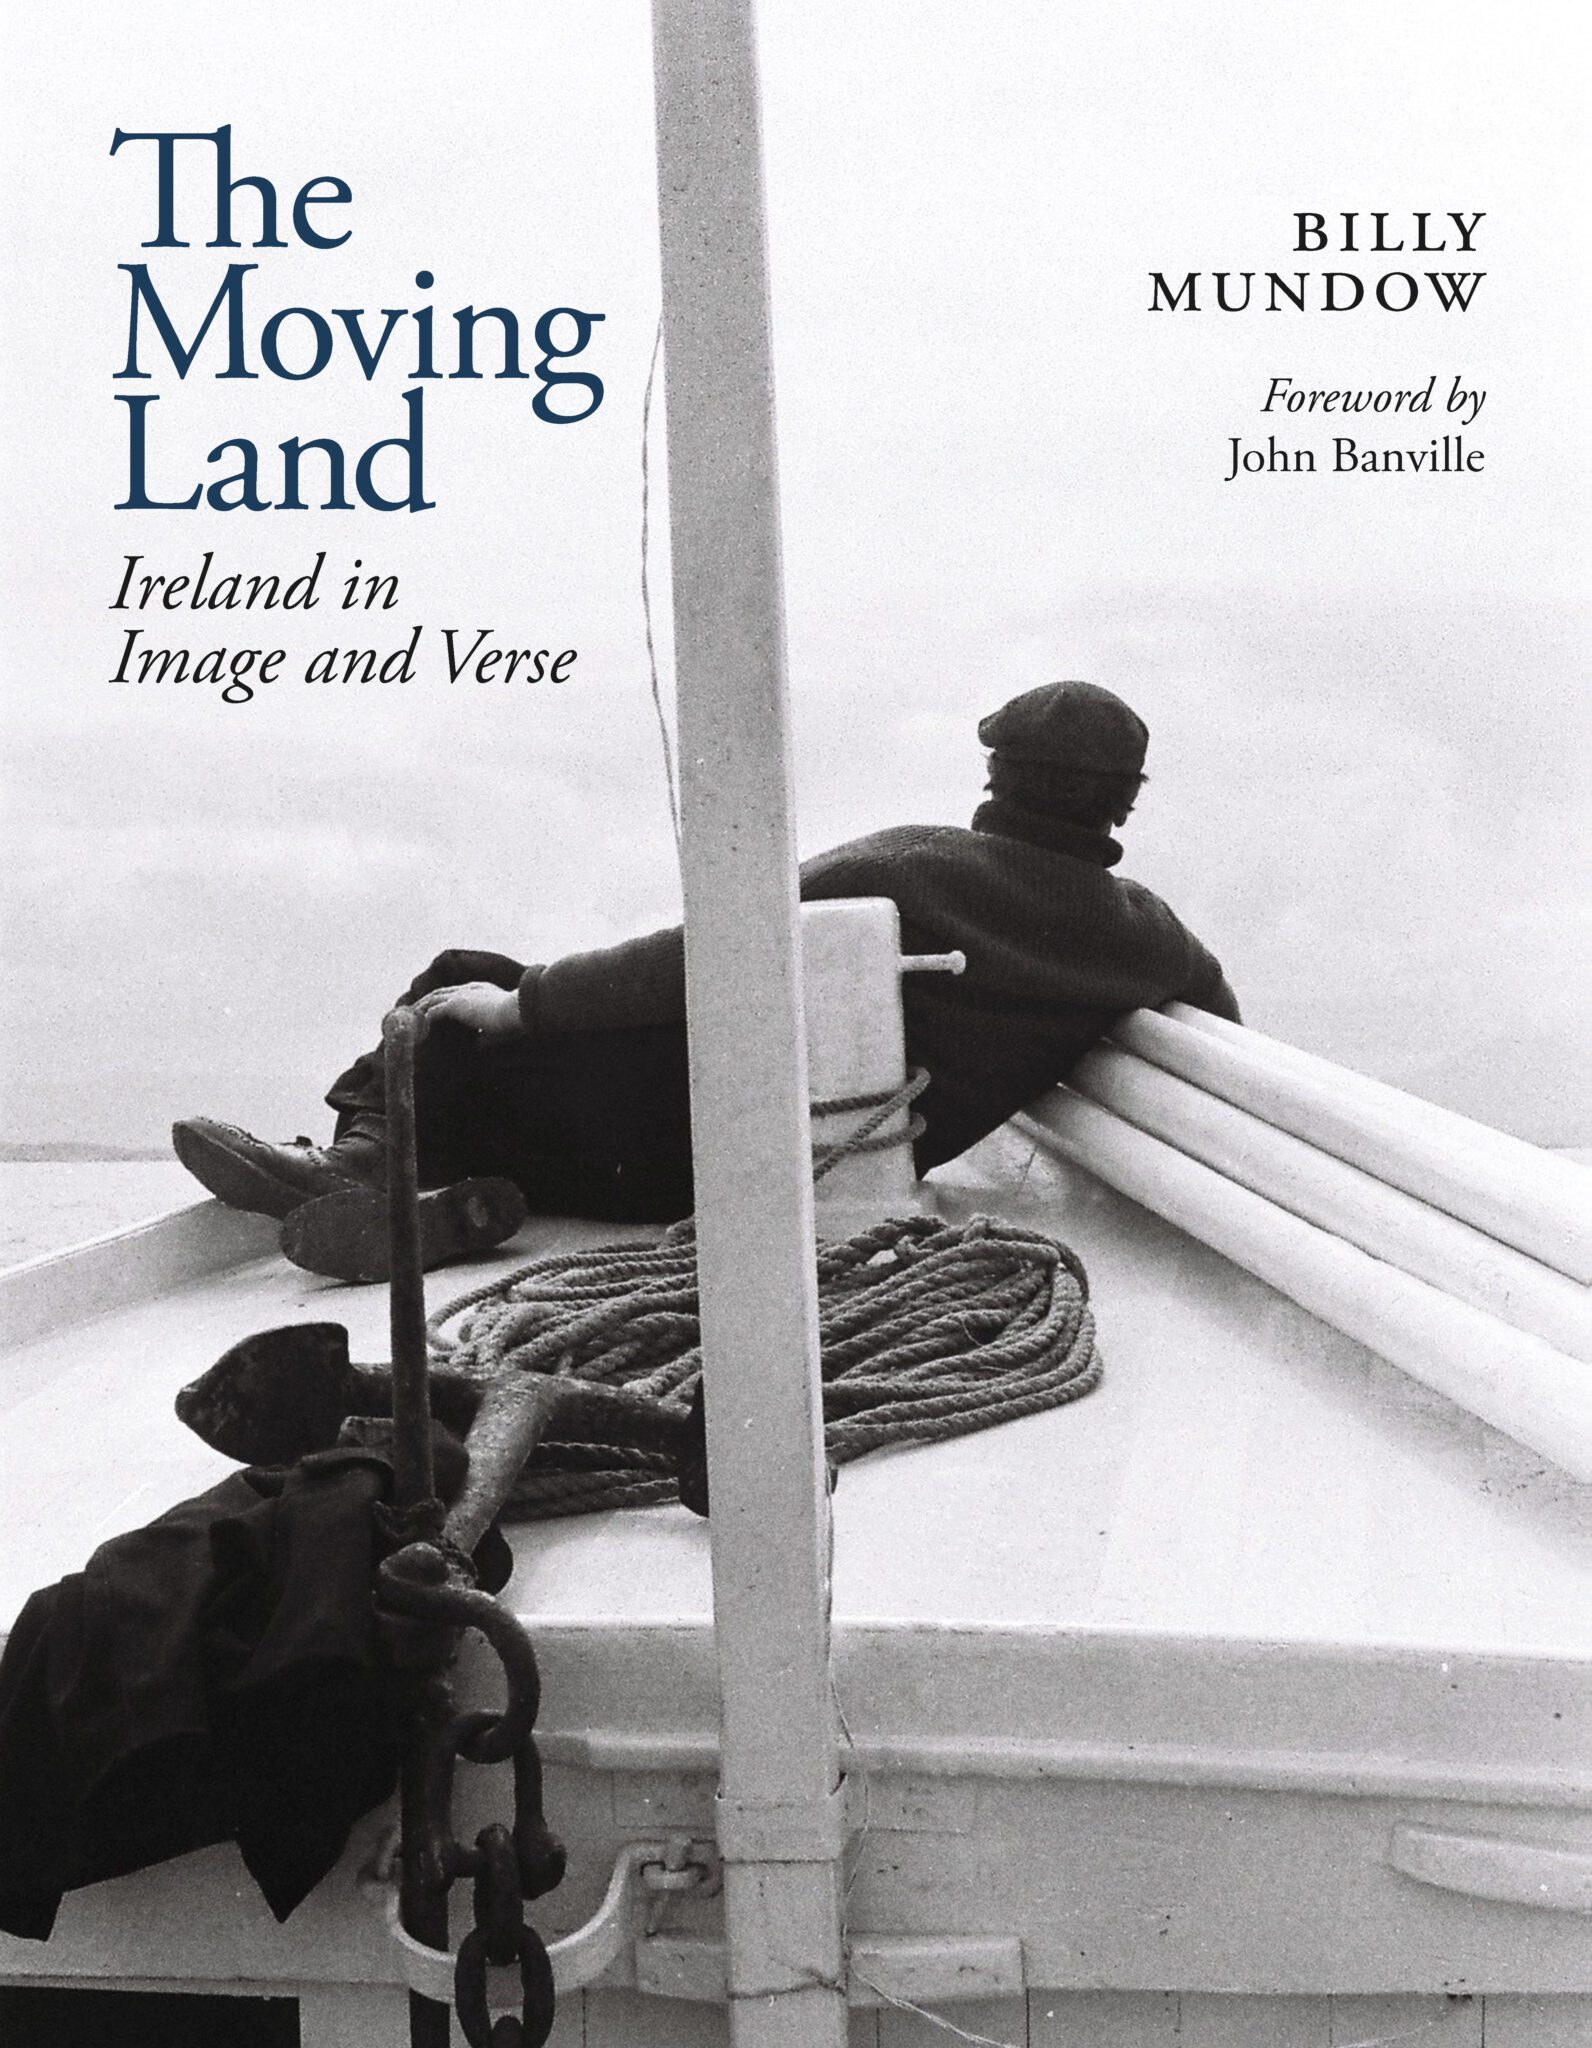 The Moving Land by Billy Mundow